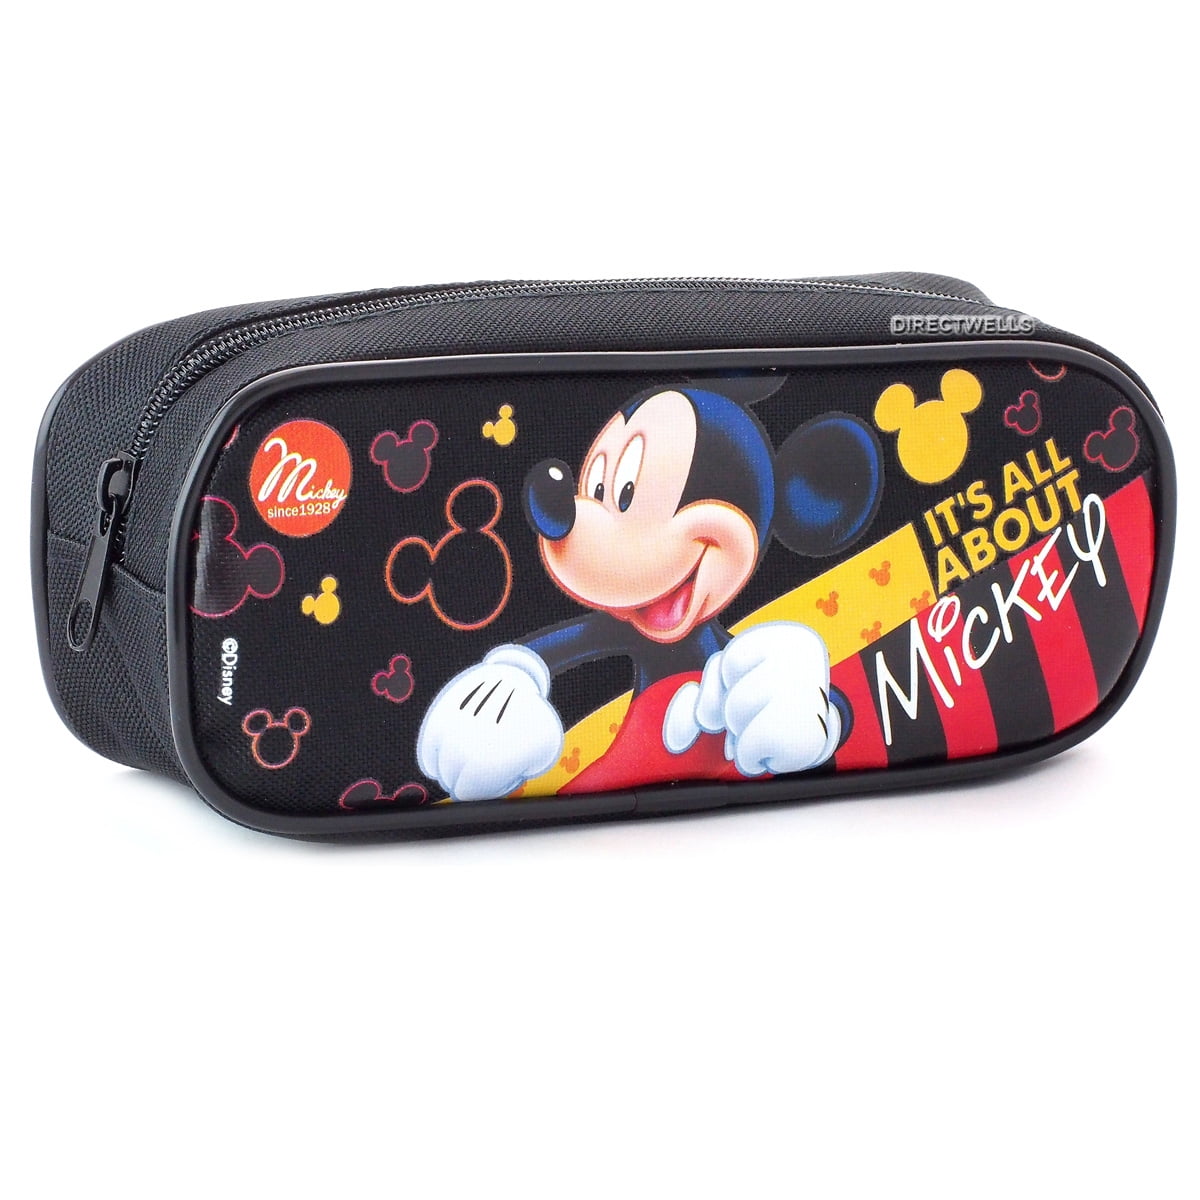 Disney Cars Red Pencil Pouch Zippered Pencil Case Authentic Bag 